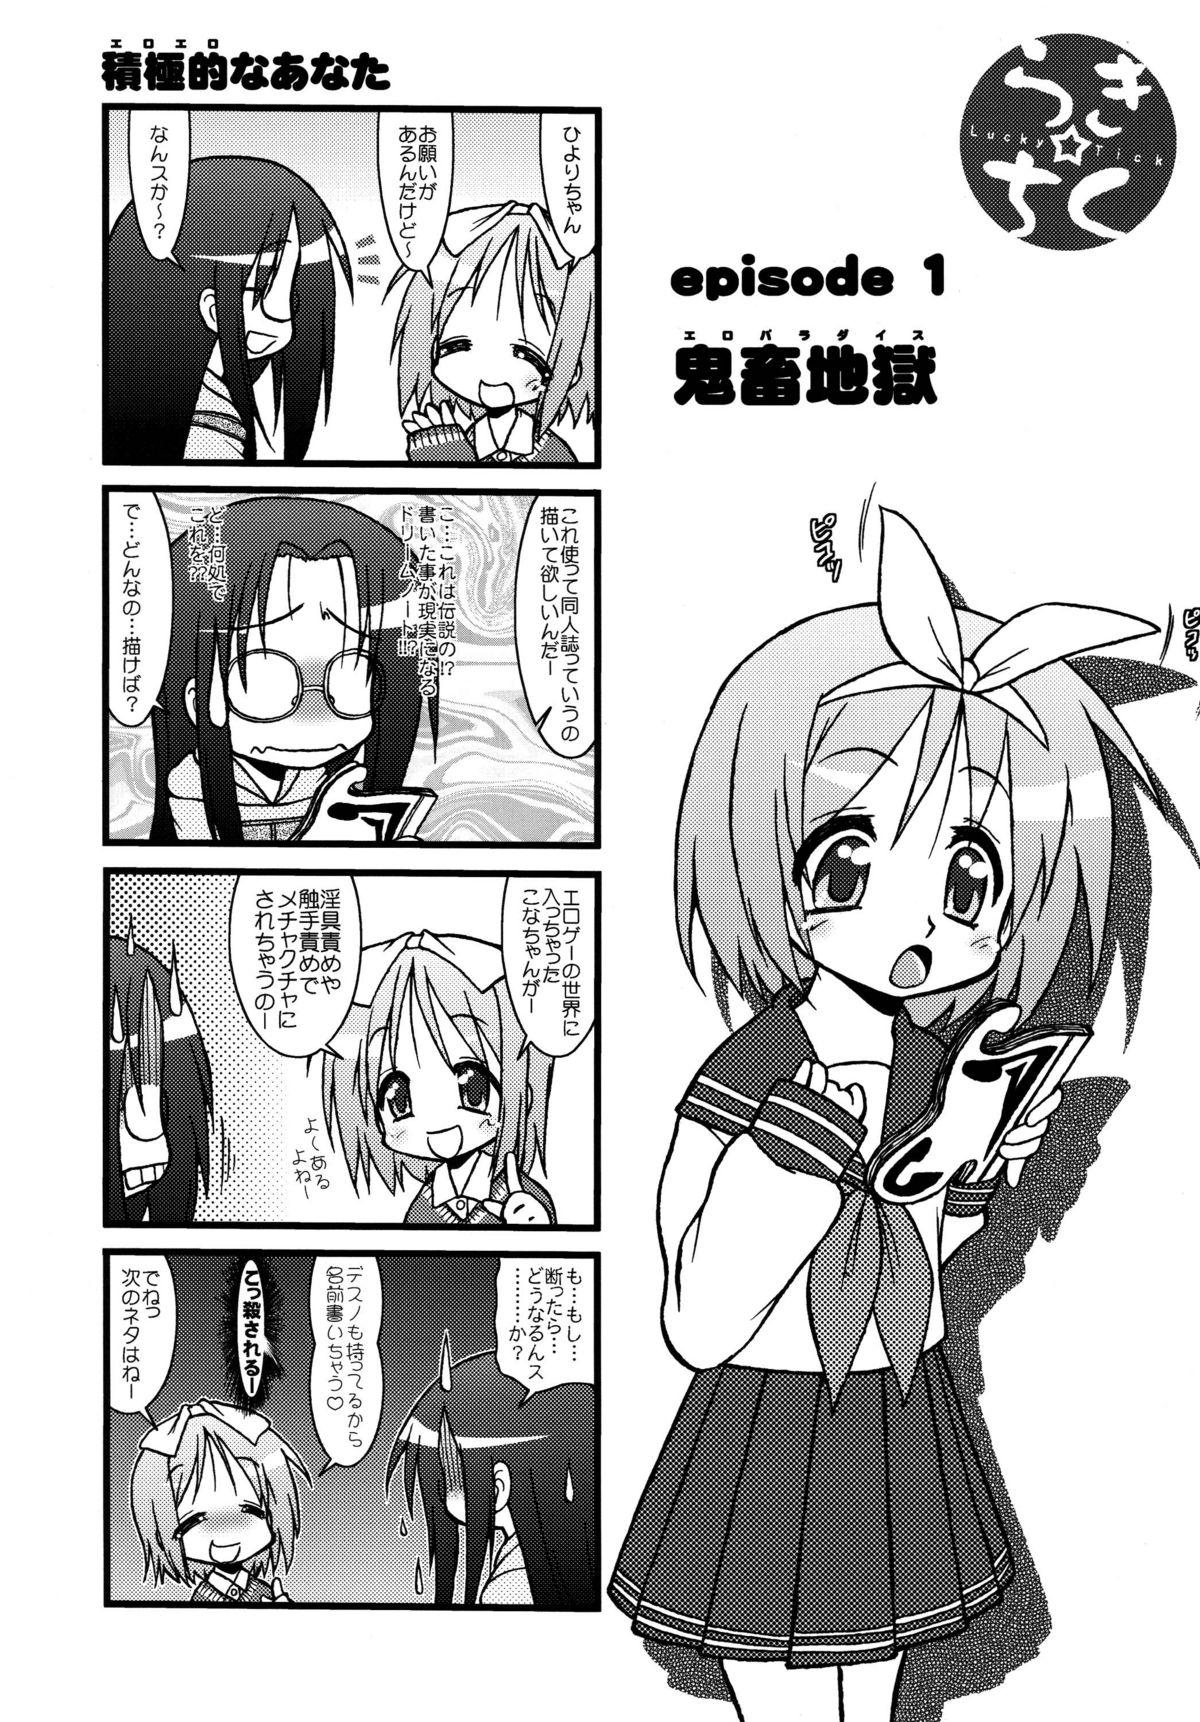 Glasses Lucky Tick 1 - Lucky star Awesome - Page 7